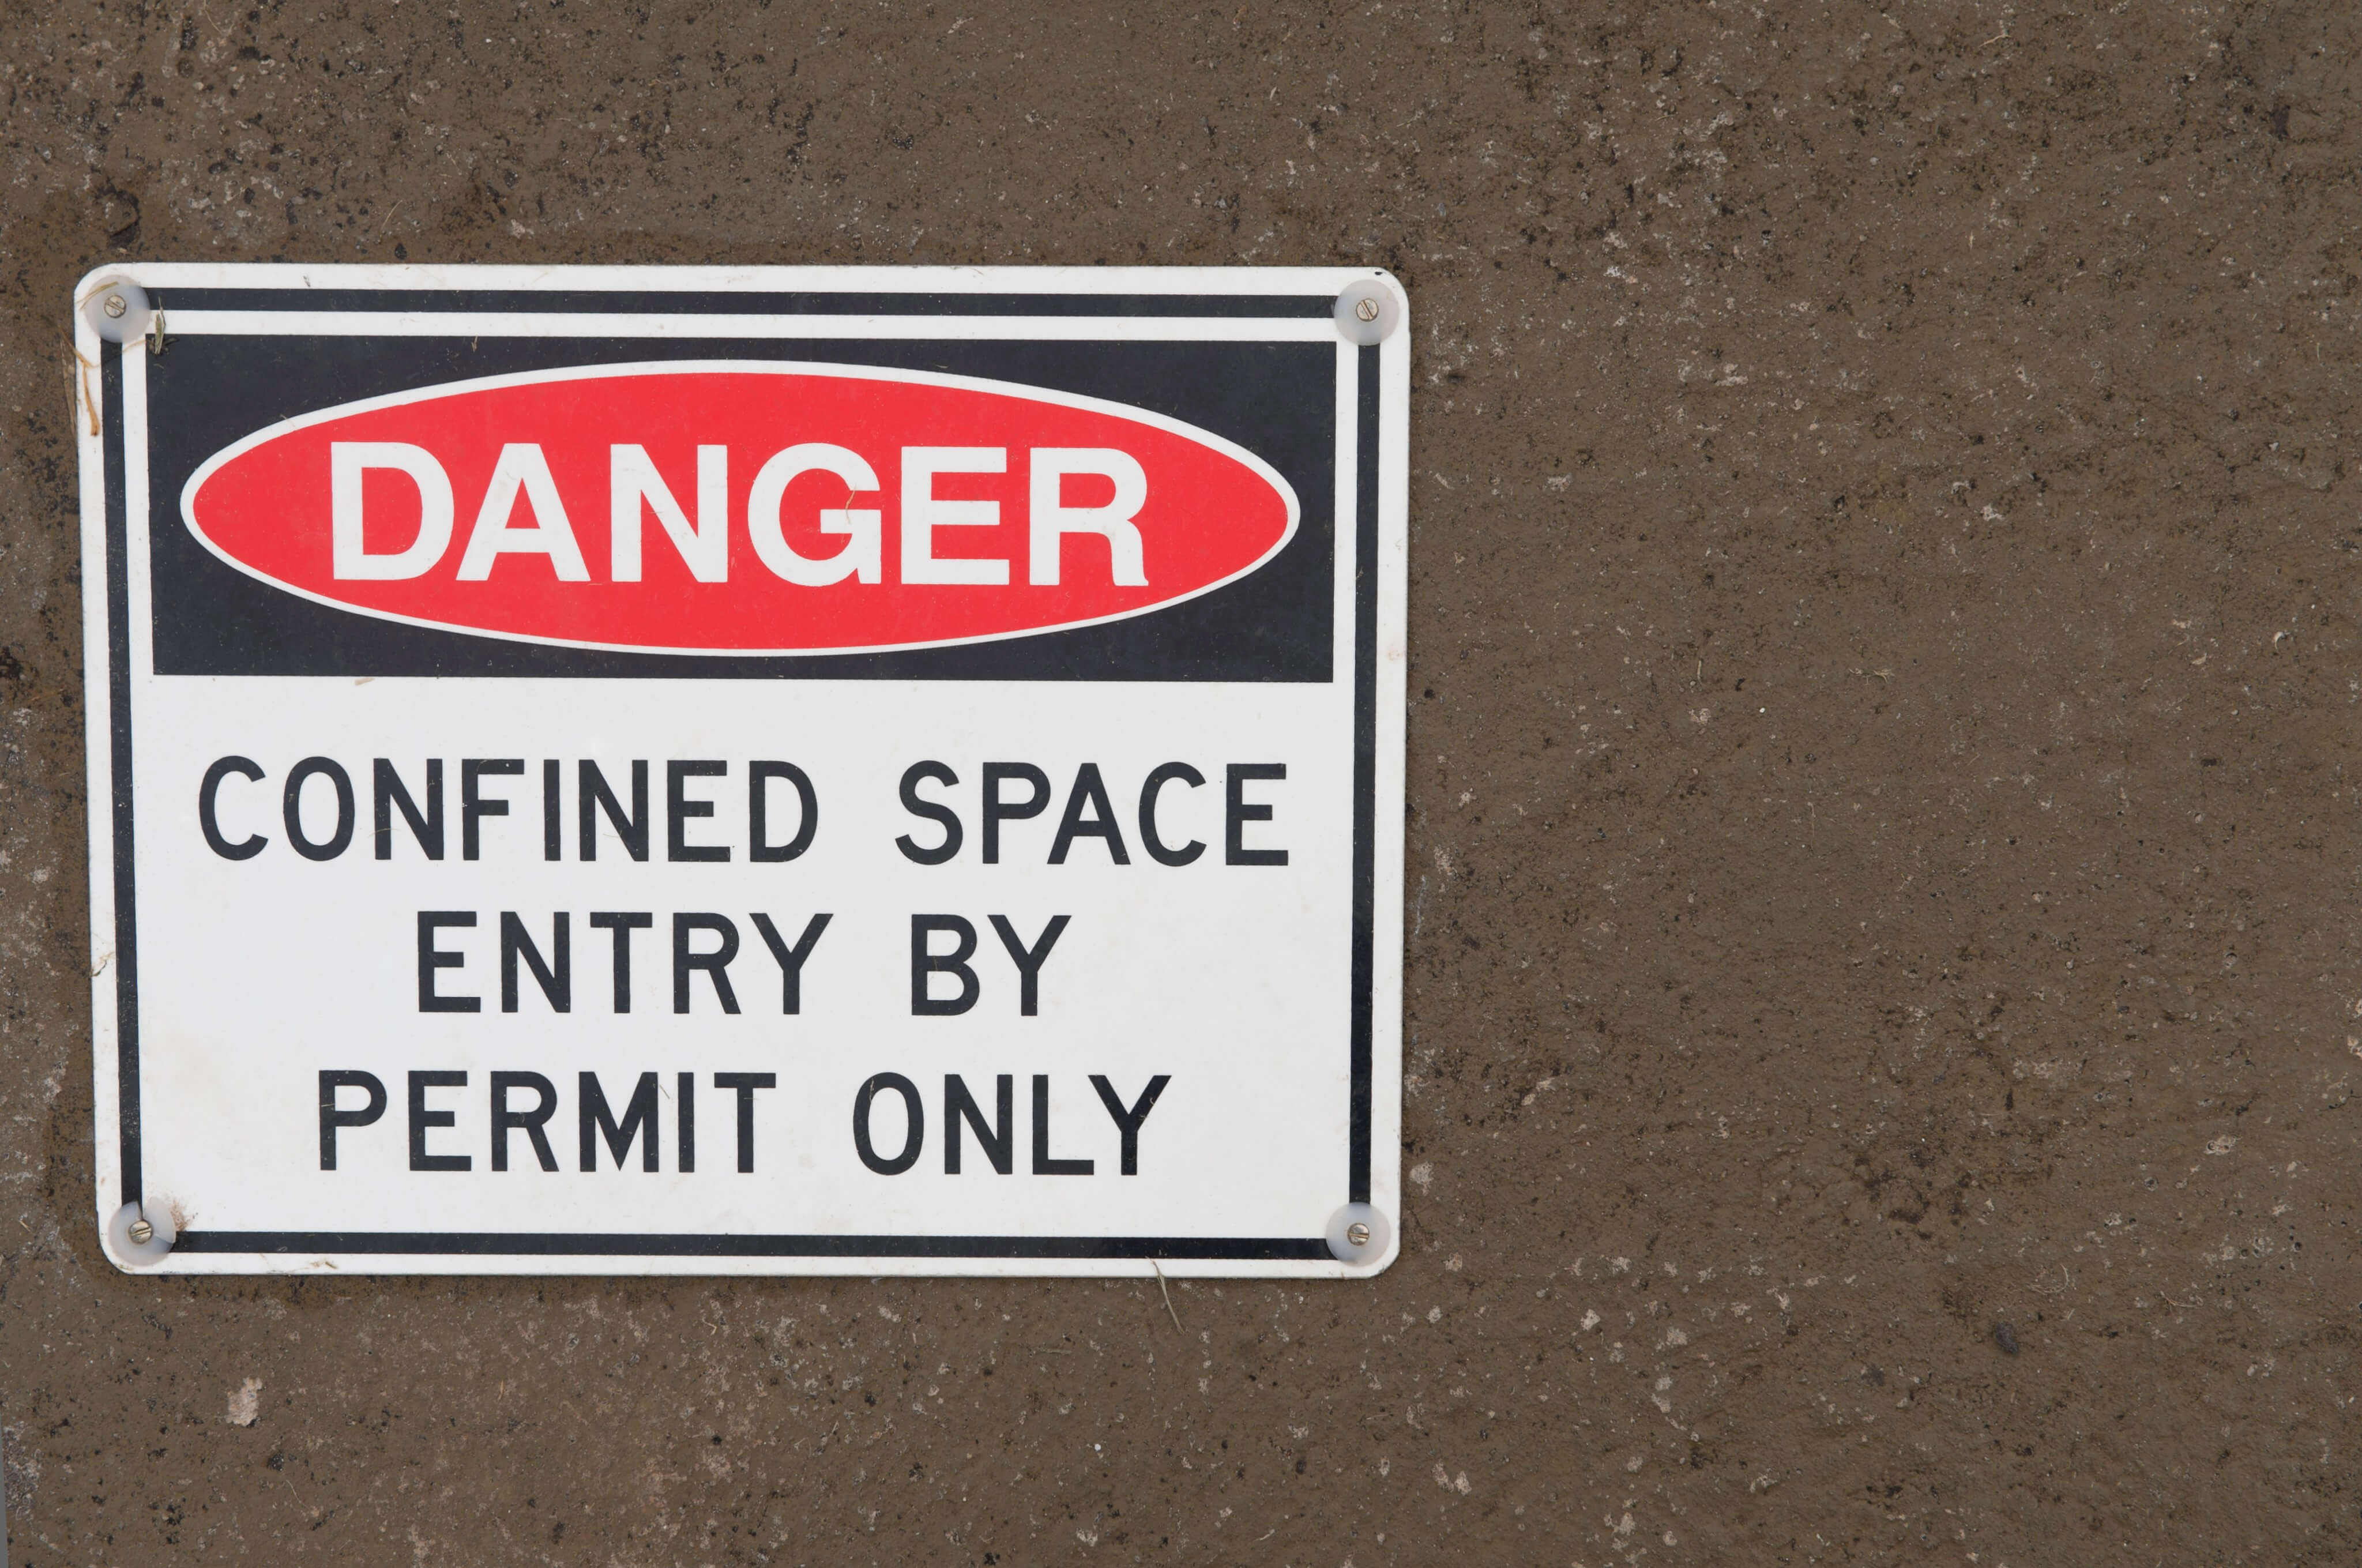 What Training You Need to Know Before Entering a Confined Space